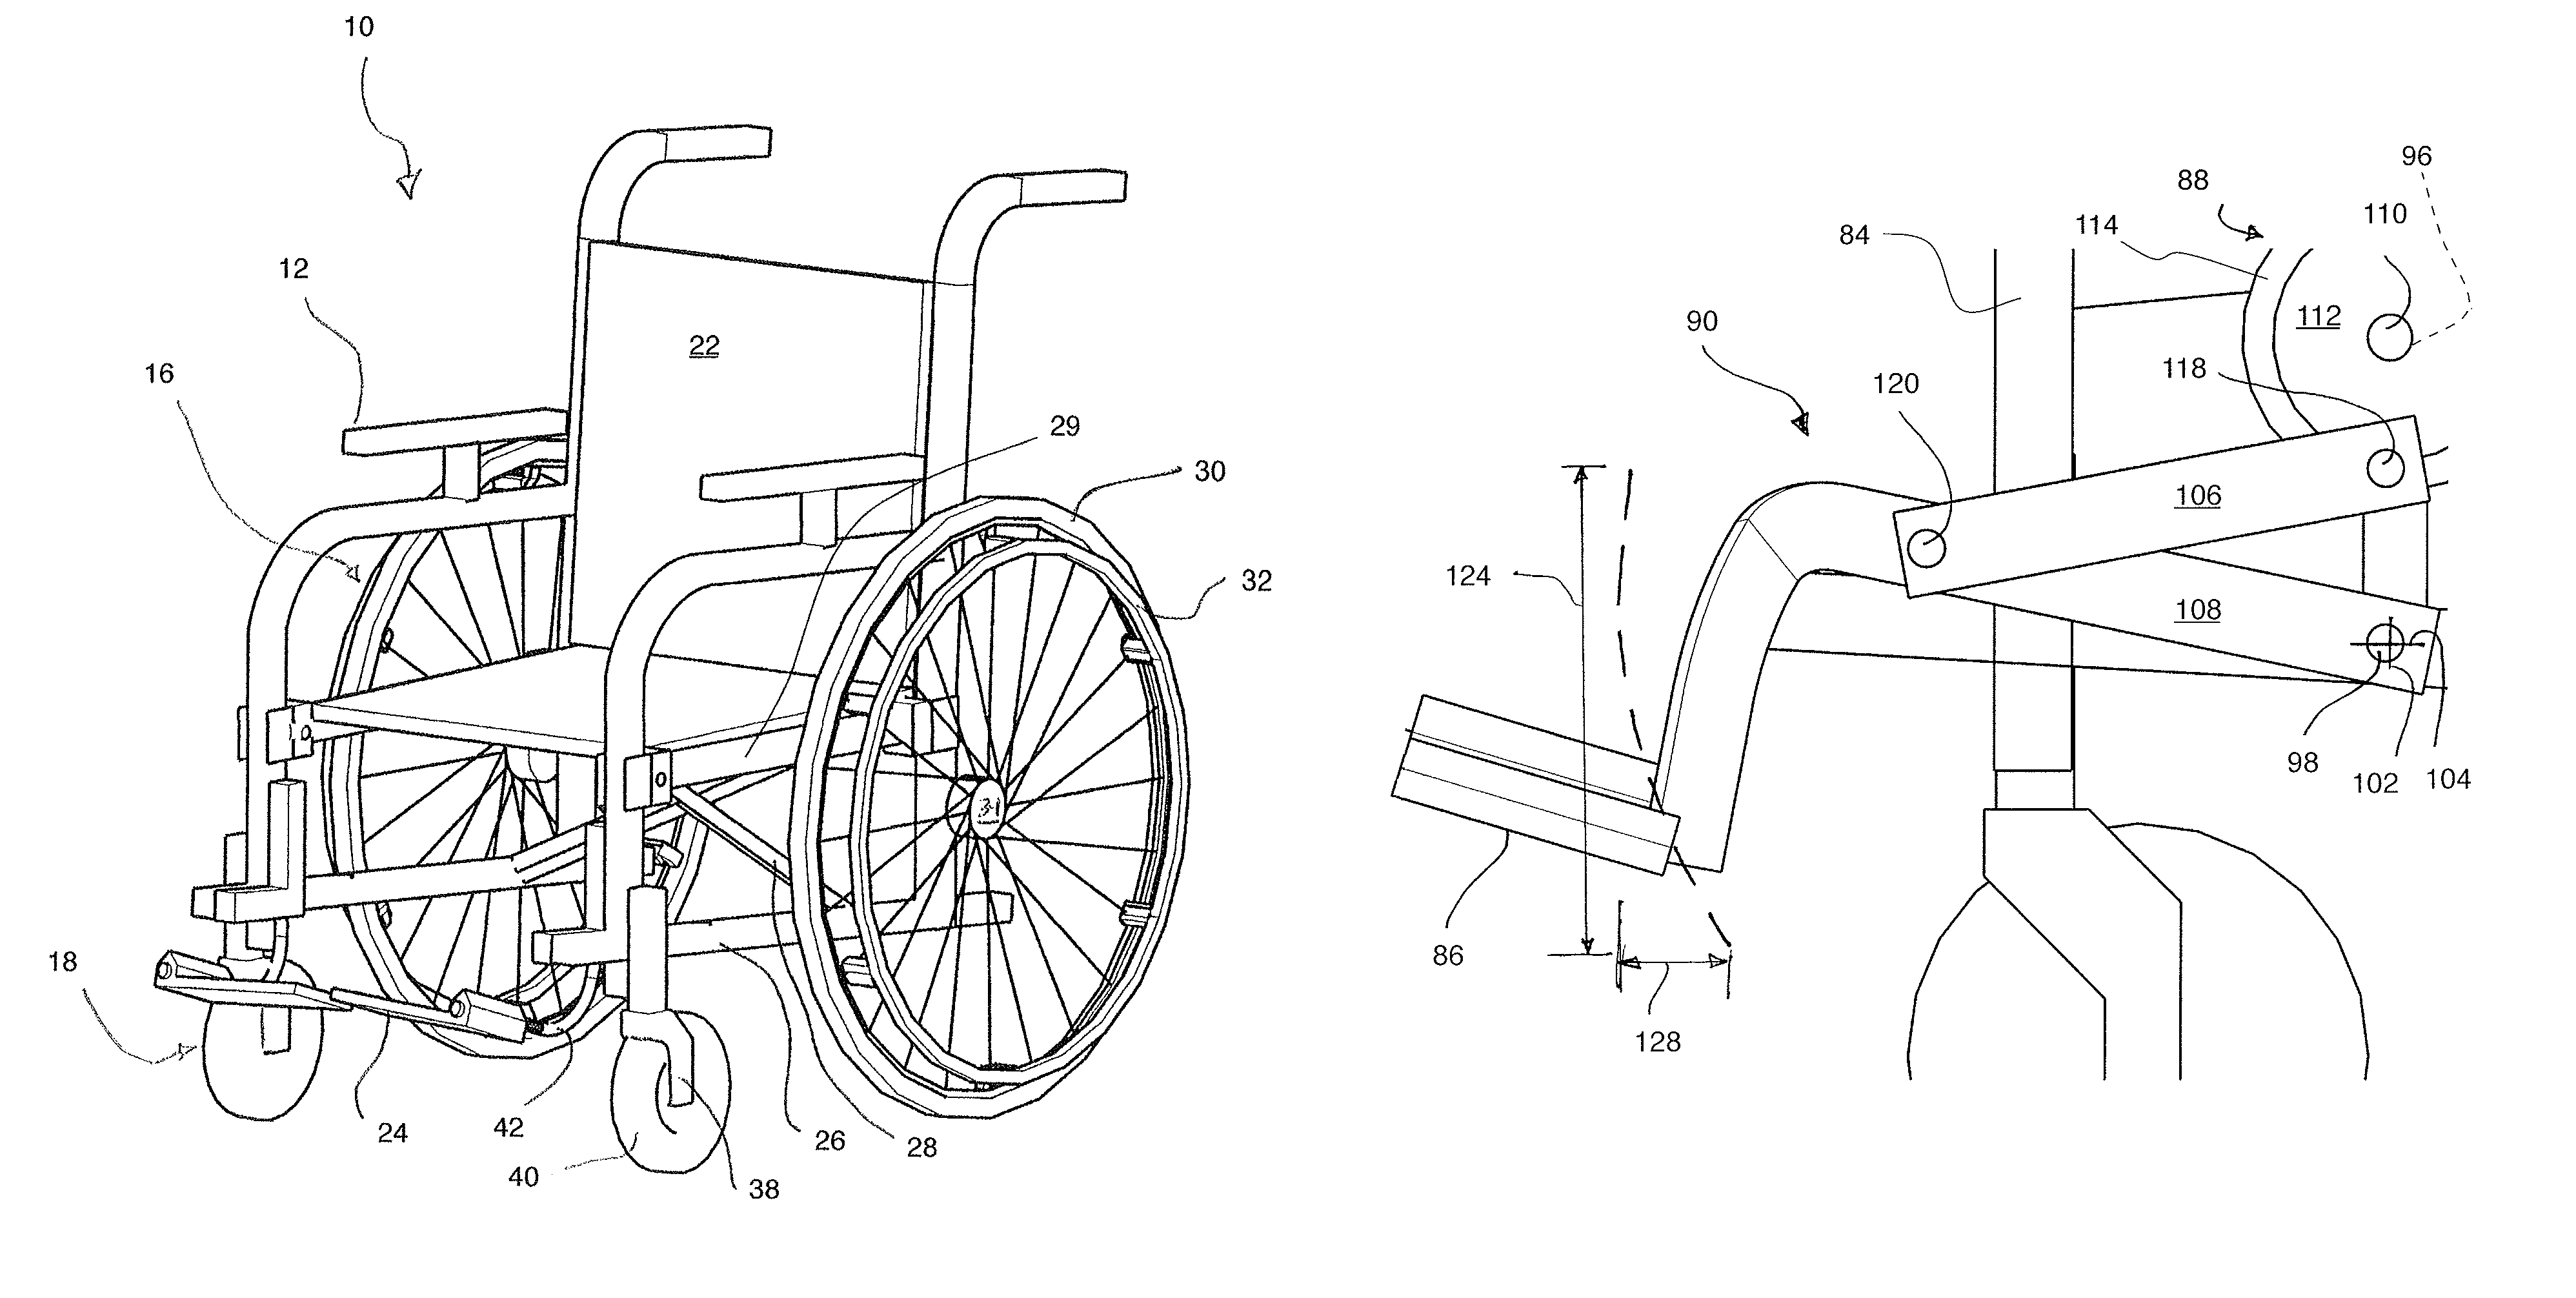 Atrophy-reducing movable foot support apparatus